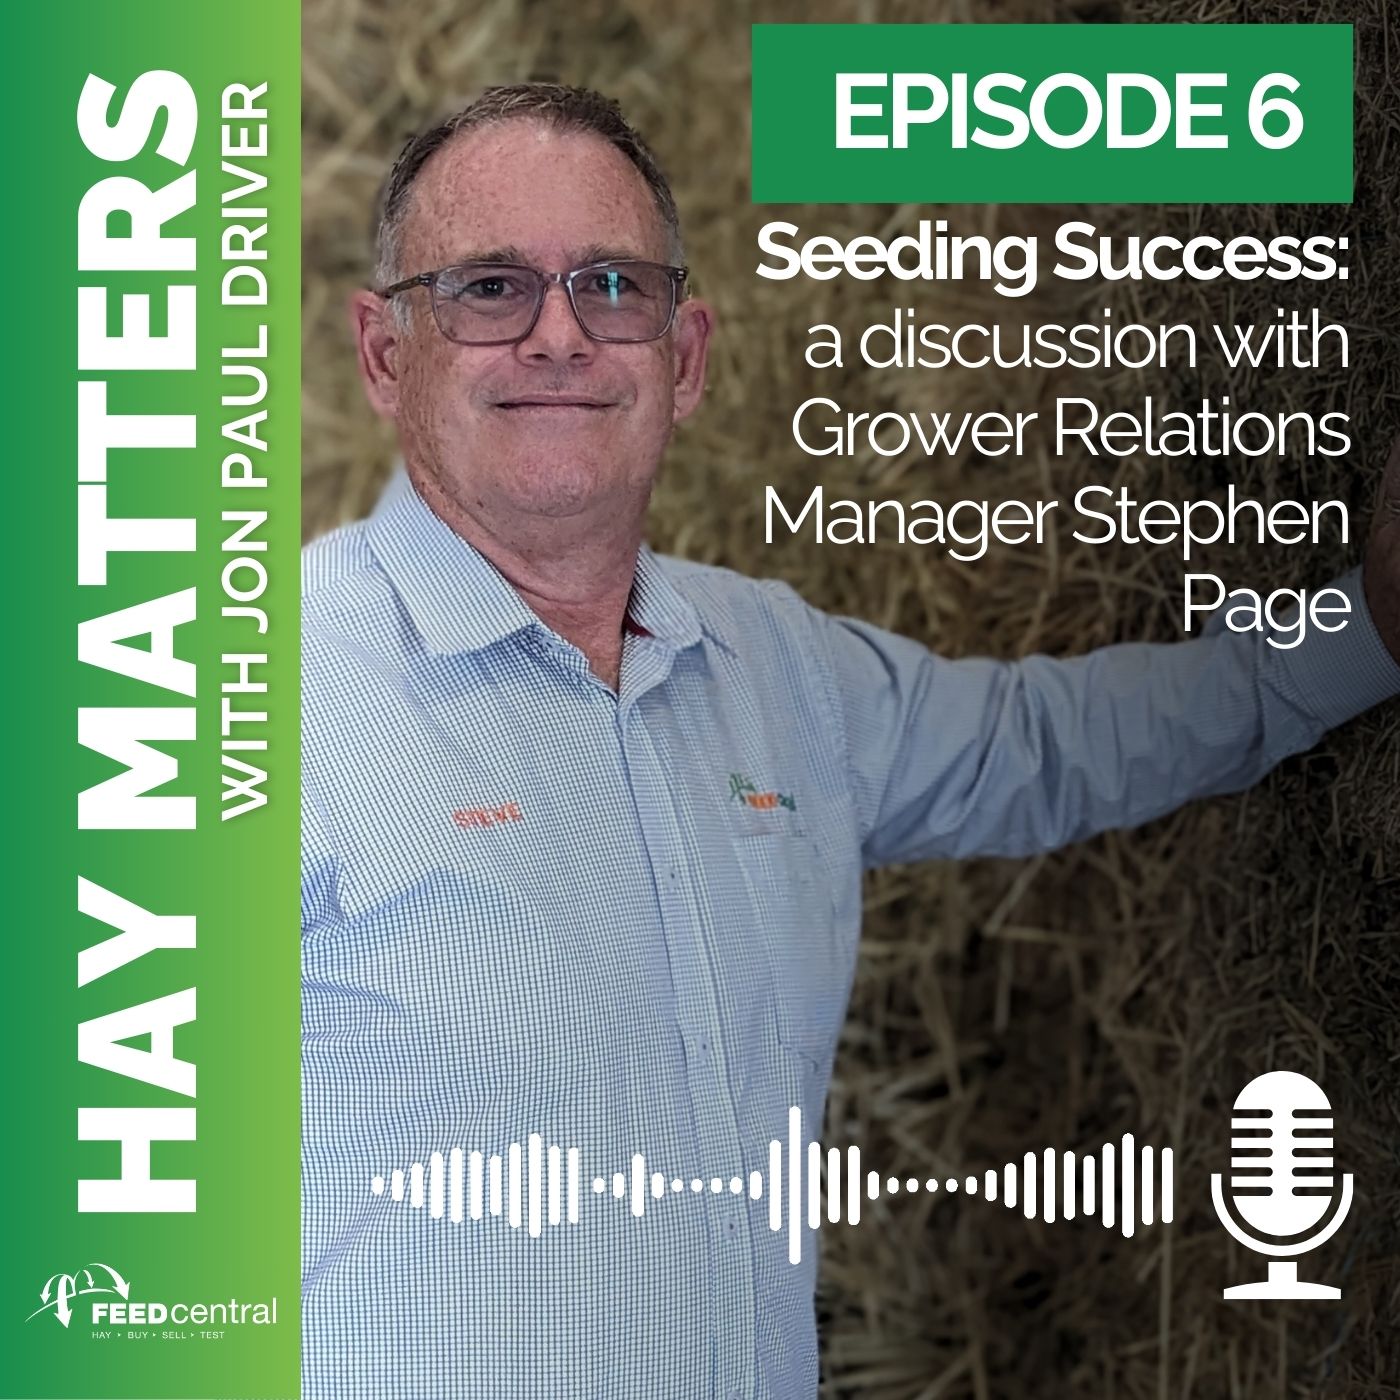 Seeding Success: a discussion with Grower Relations Manager Stephen Page